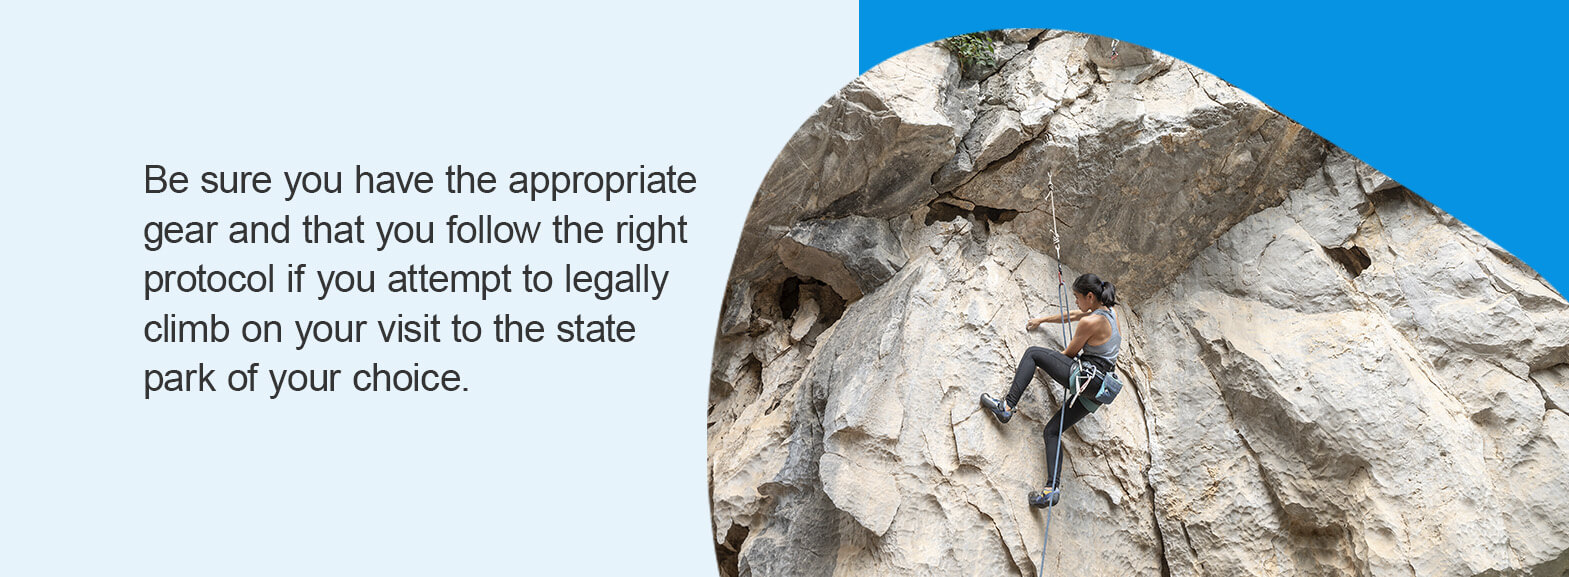 Rock Climbing - Be sure you have the appropriate gear and that you follow the right protocol if you attempt to legally climb on your visit to the state park of your choice. 